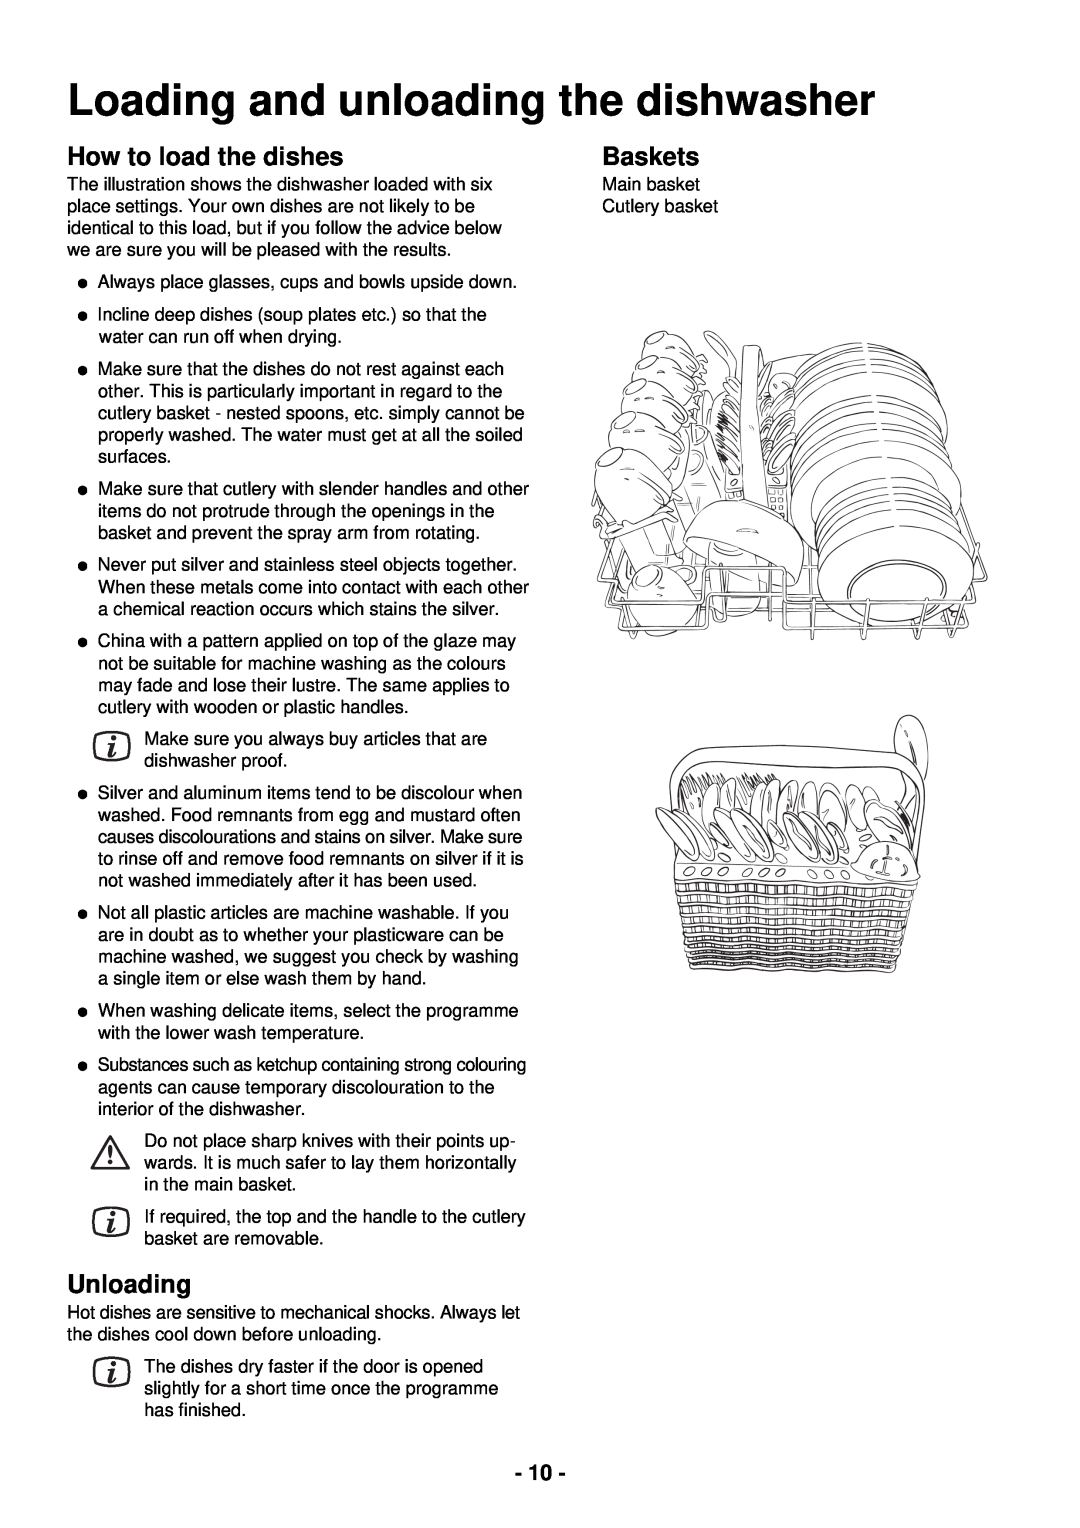 Zanussi DCE 5655 manual Loading and unloading the dishwasher, How to load the dishes, Unloading, Baskets 